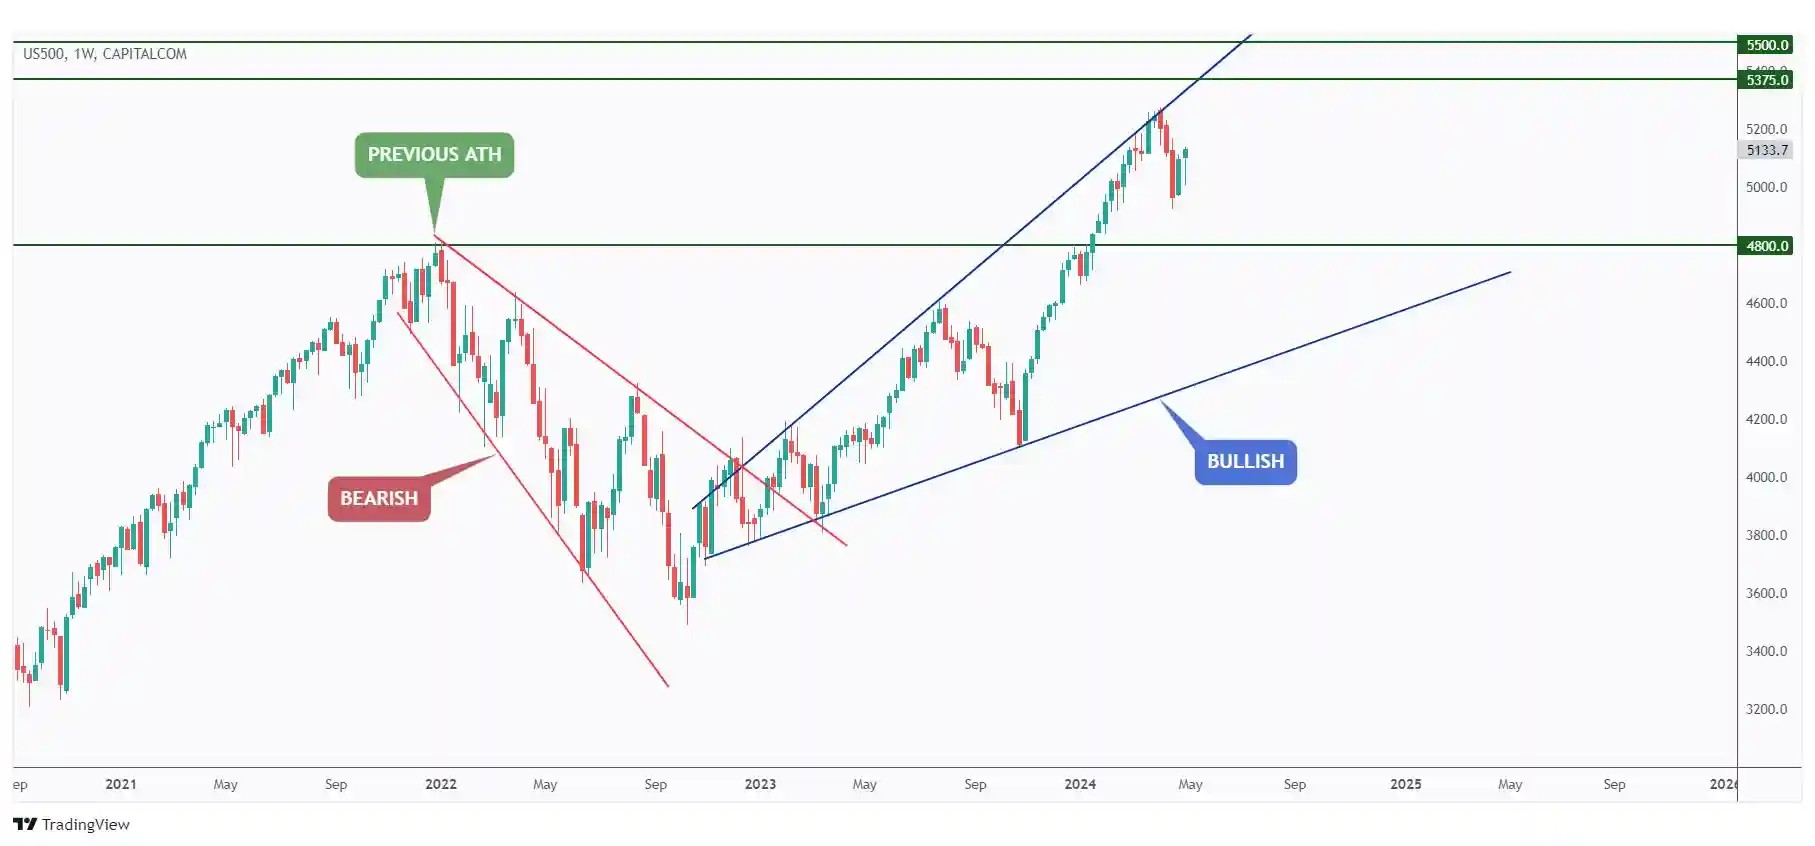 US500 weekly chart overall bullish and currently rejecting the upper bound of the wedge pattern.